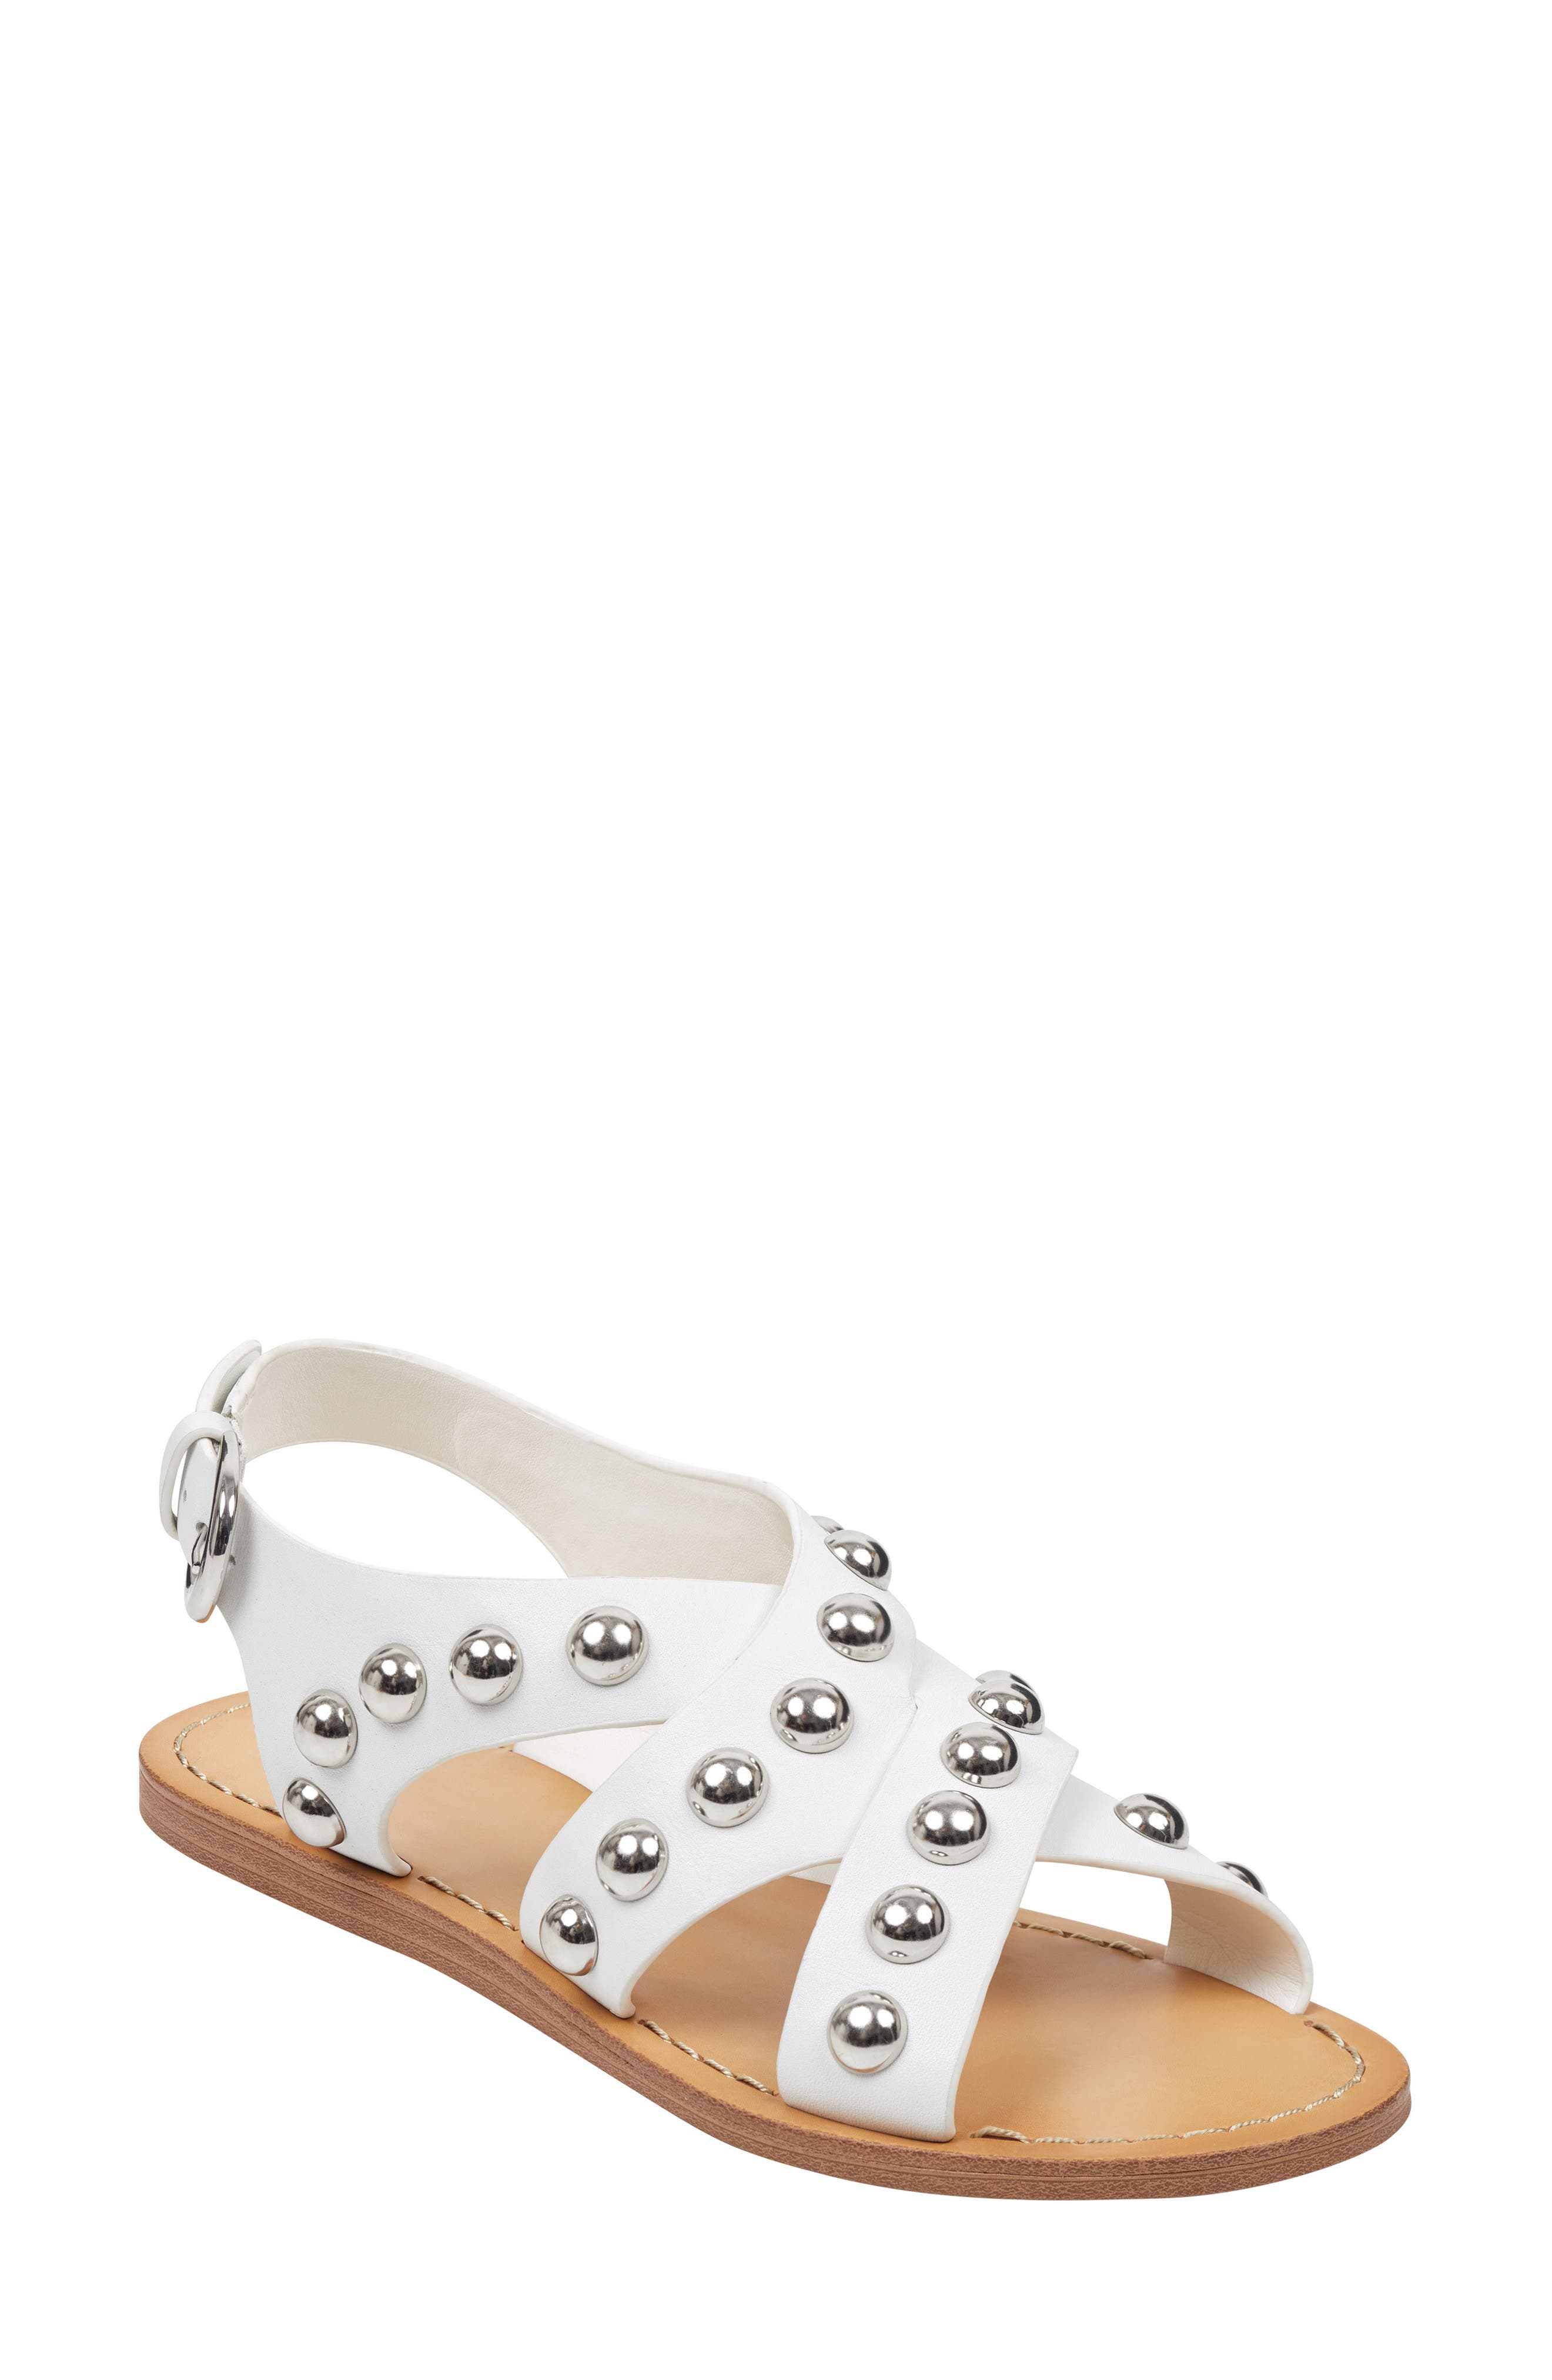 marc fisher studded shoes